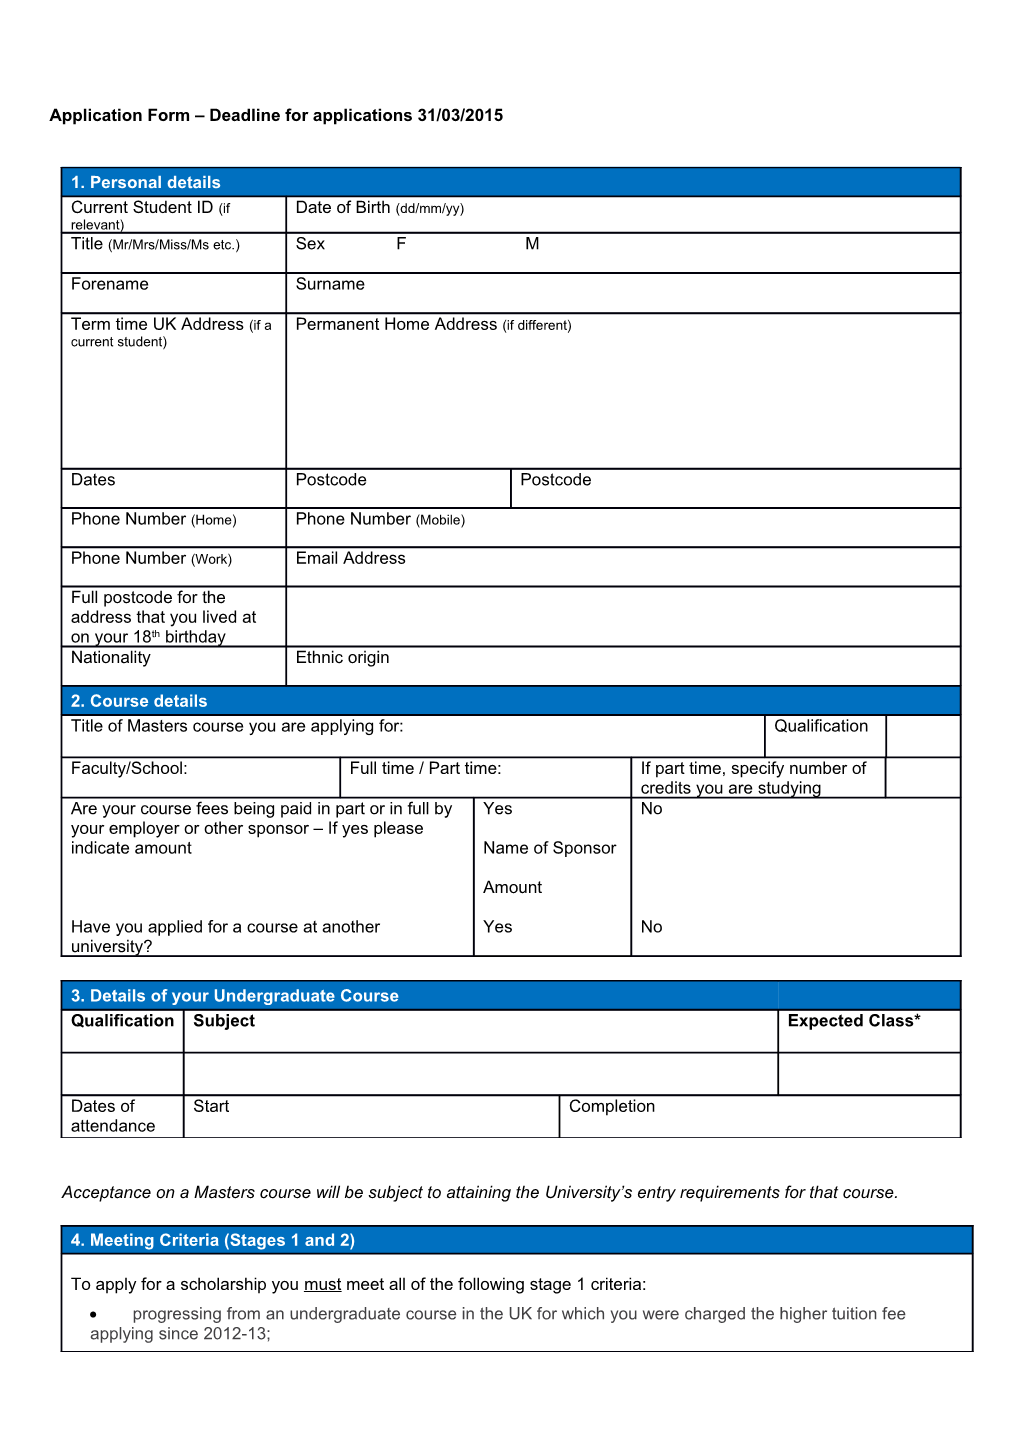 Application Form for the Access To